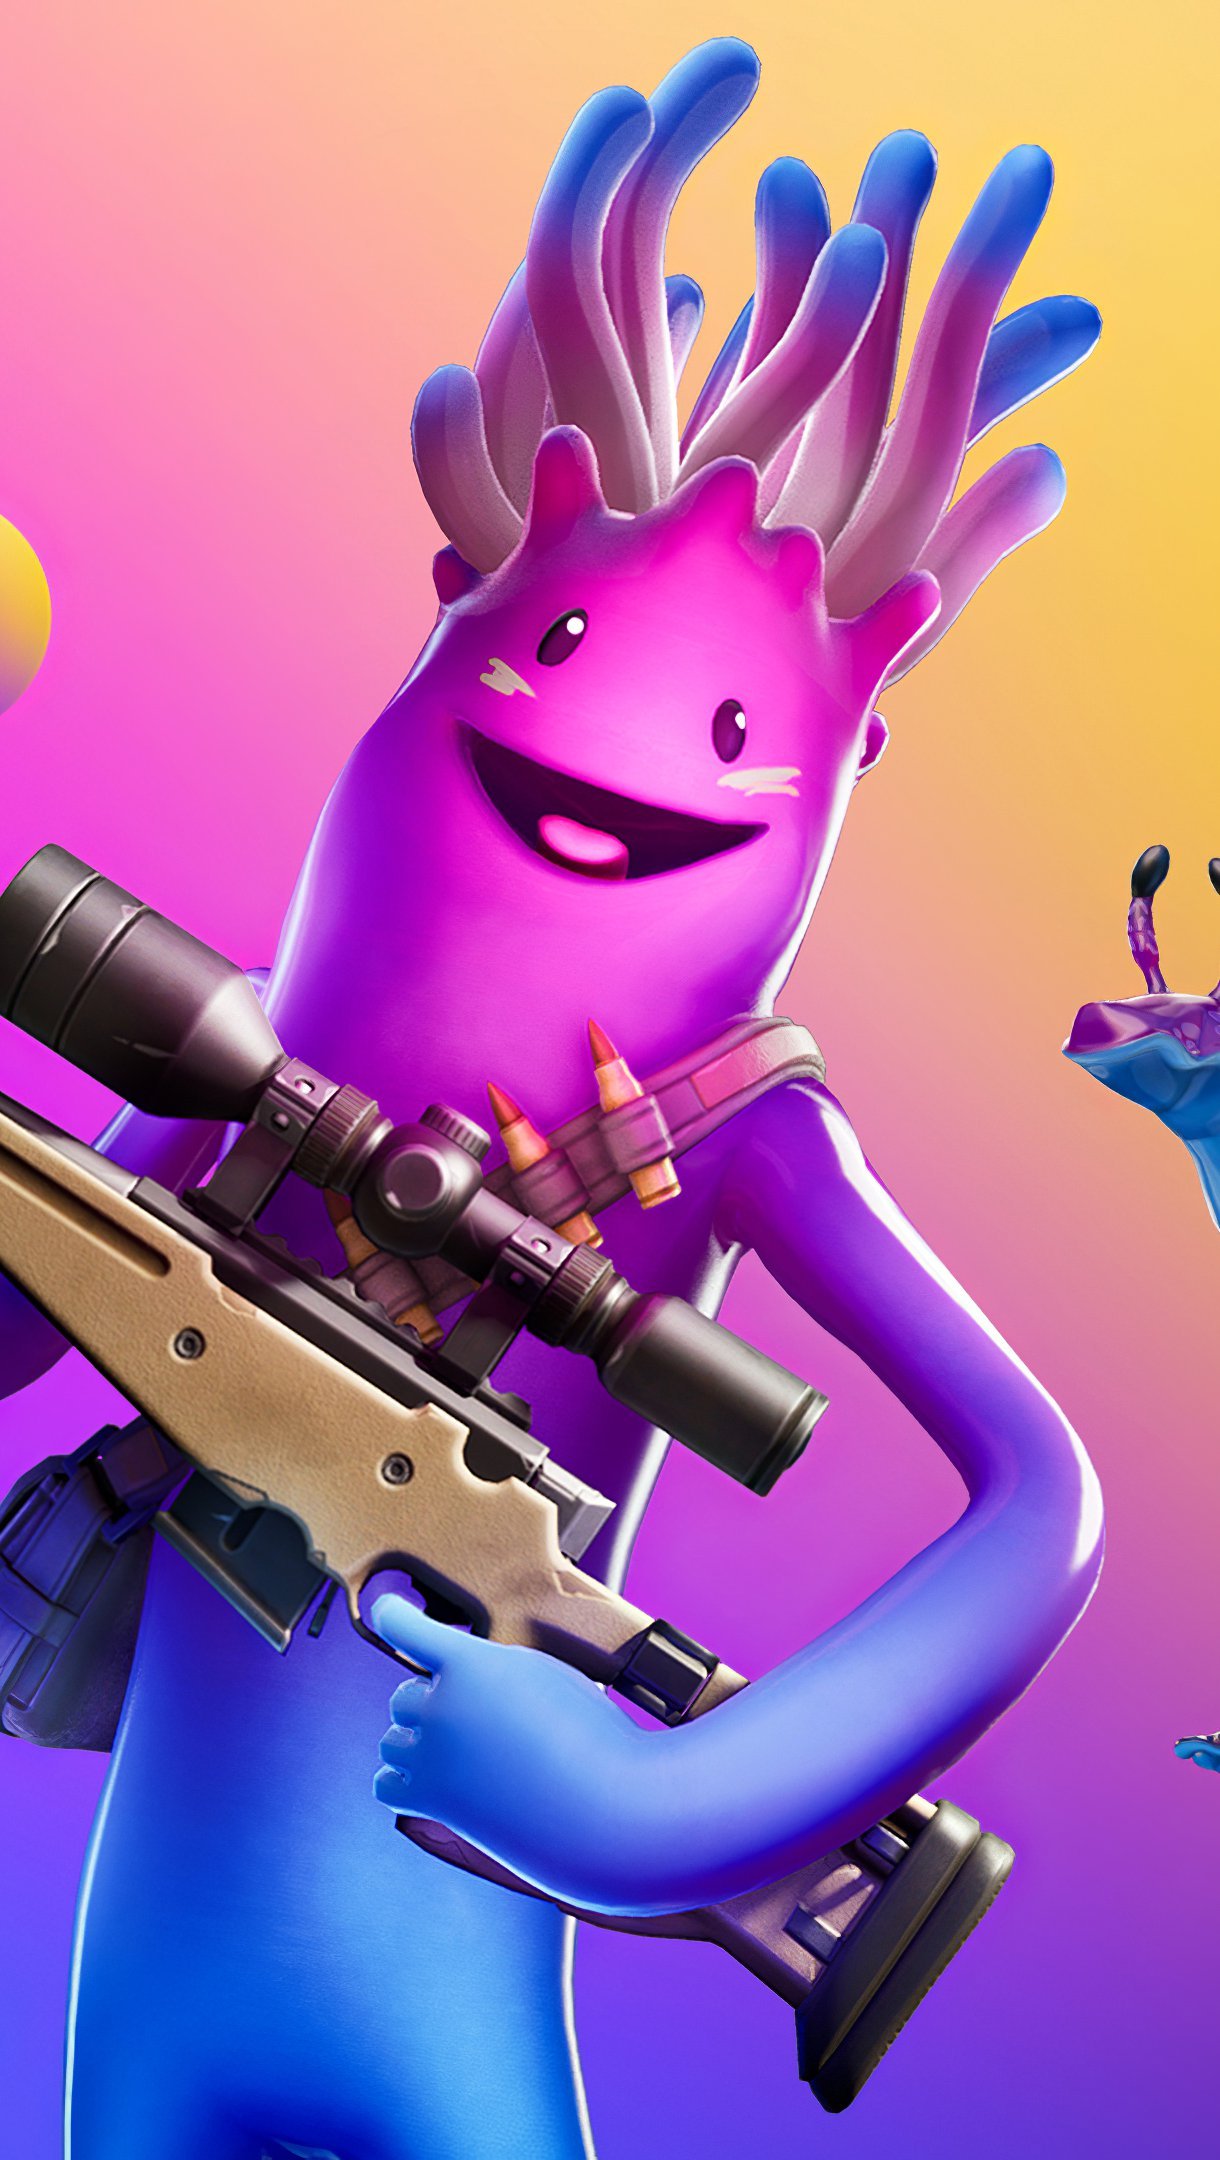 1200 Fortnite HD Wallpapers and Backgrounds